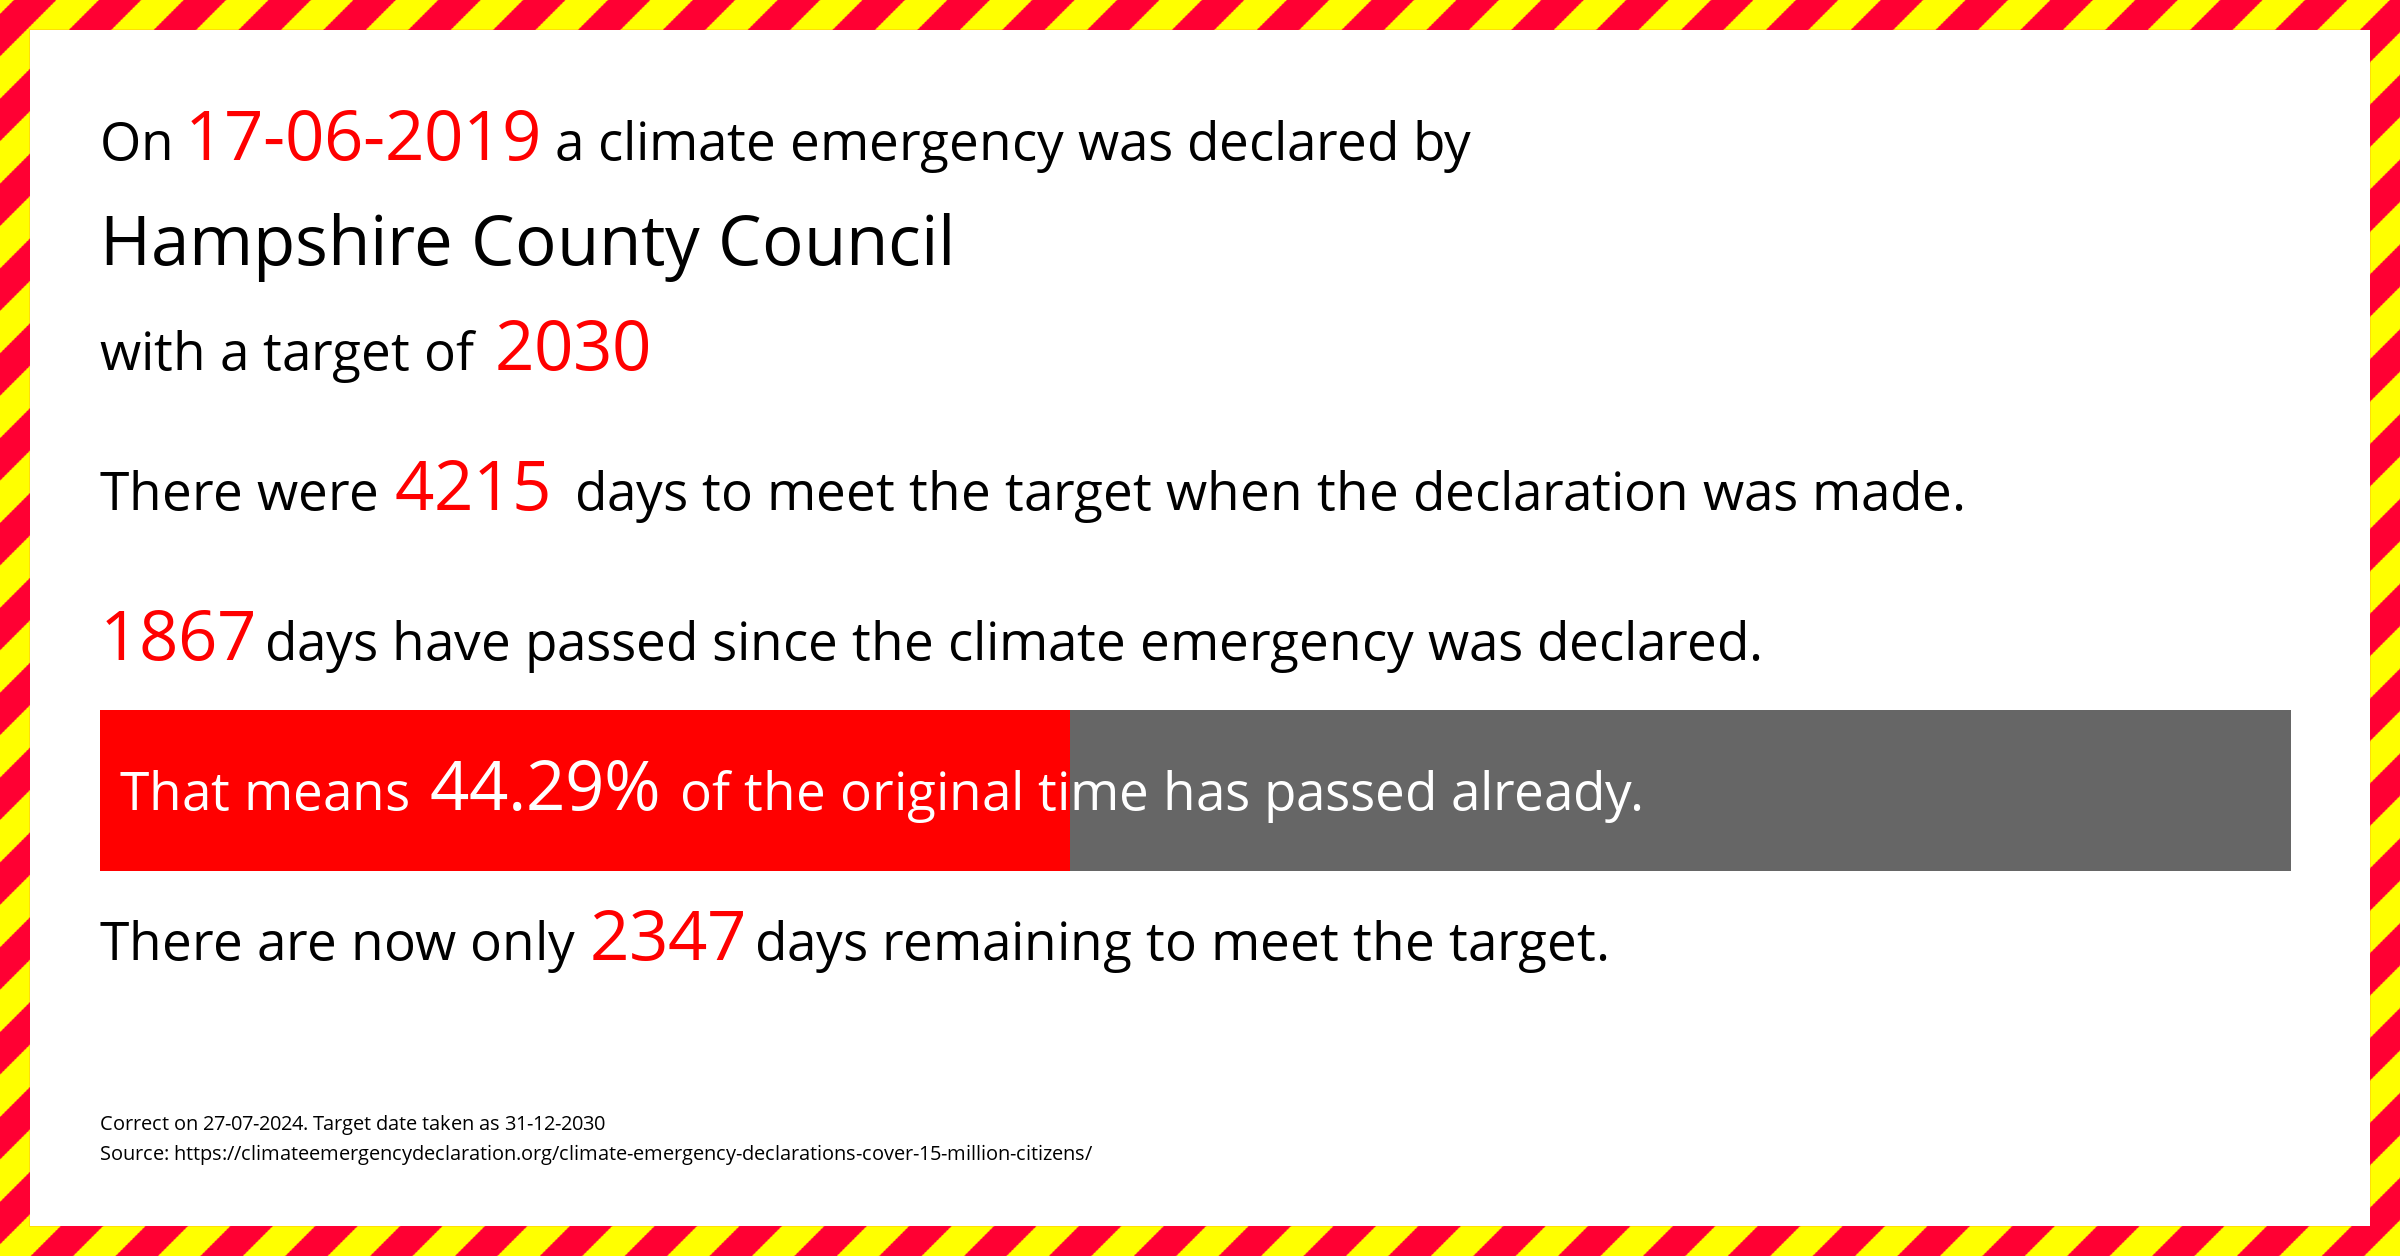 Hampshire County Council declared a Climate emergency on Monday 17th June 2019, with a target of 2030.